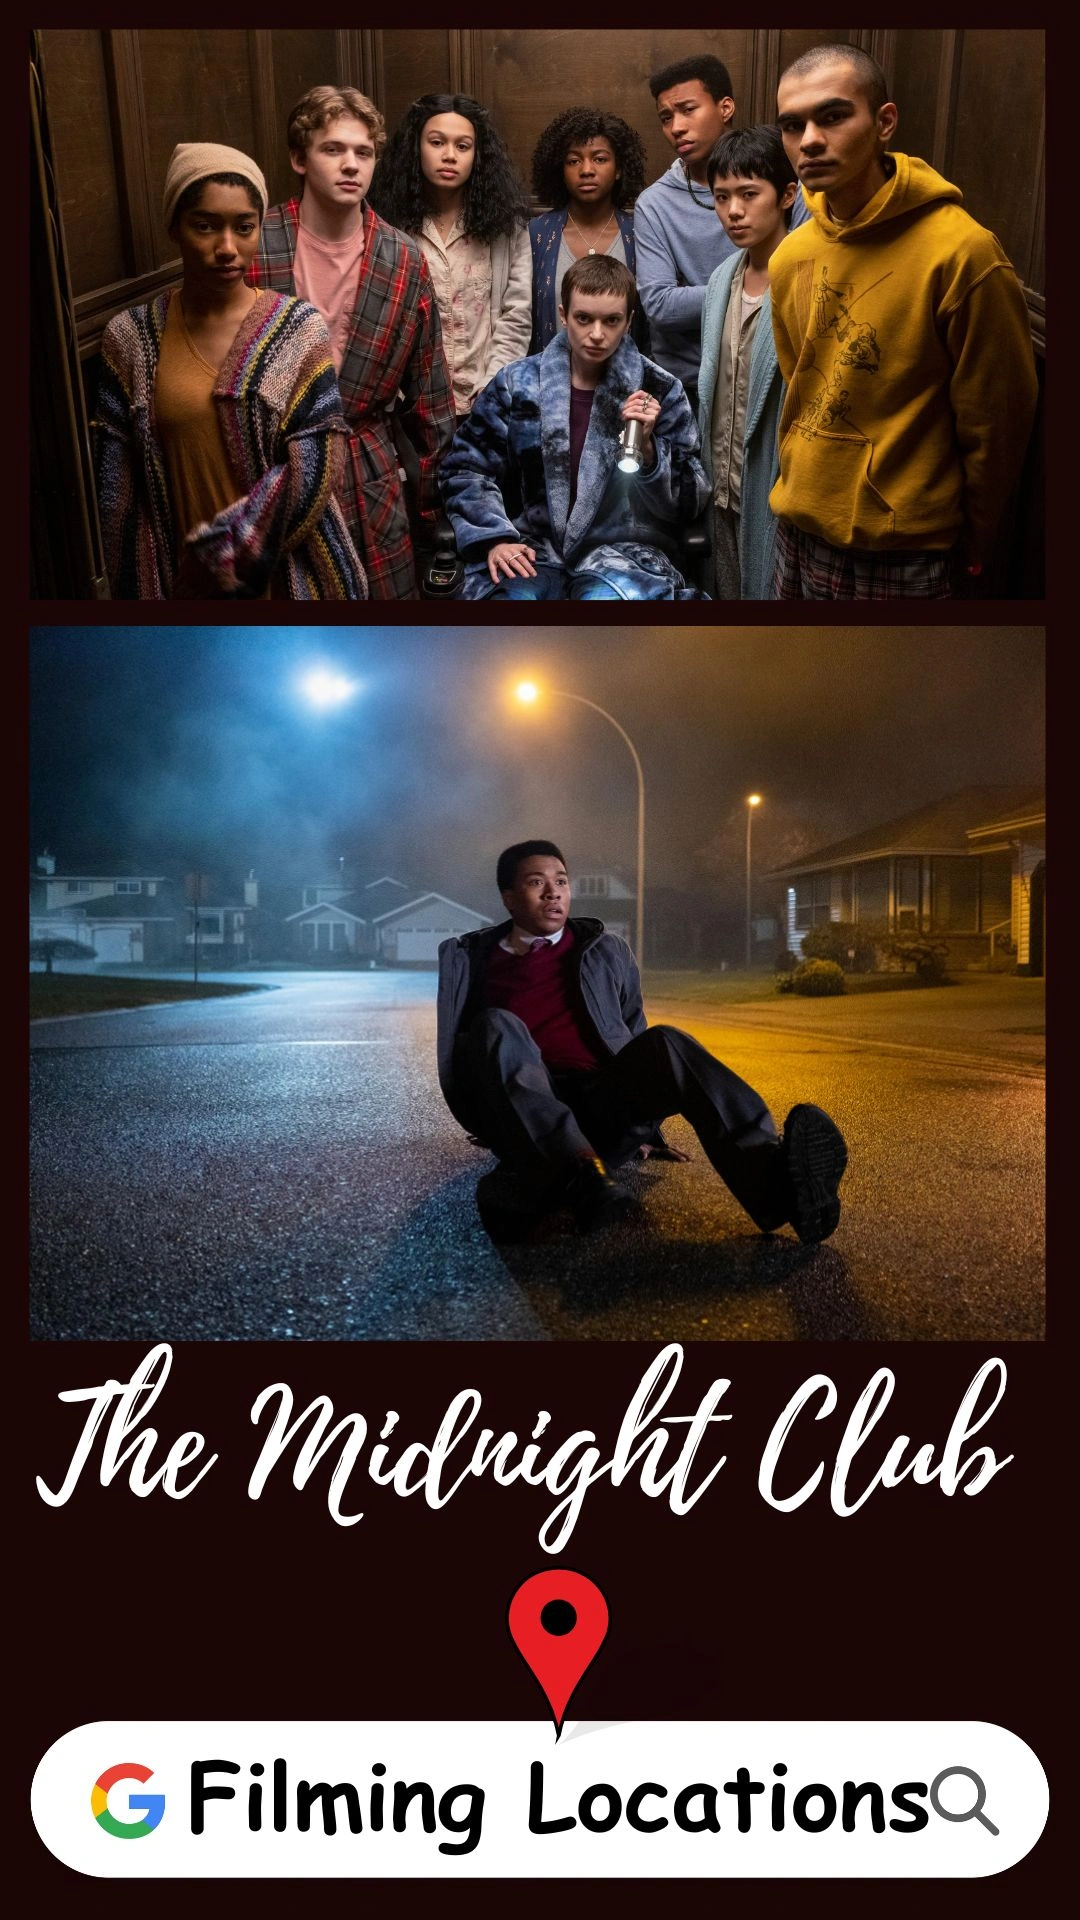 The Midnight Club Filming Locations